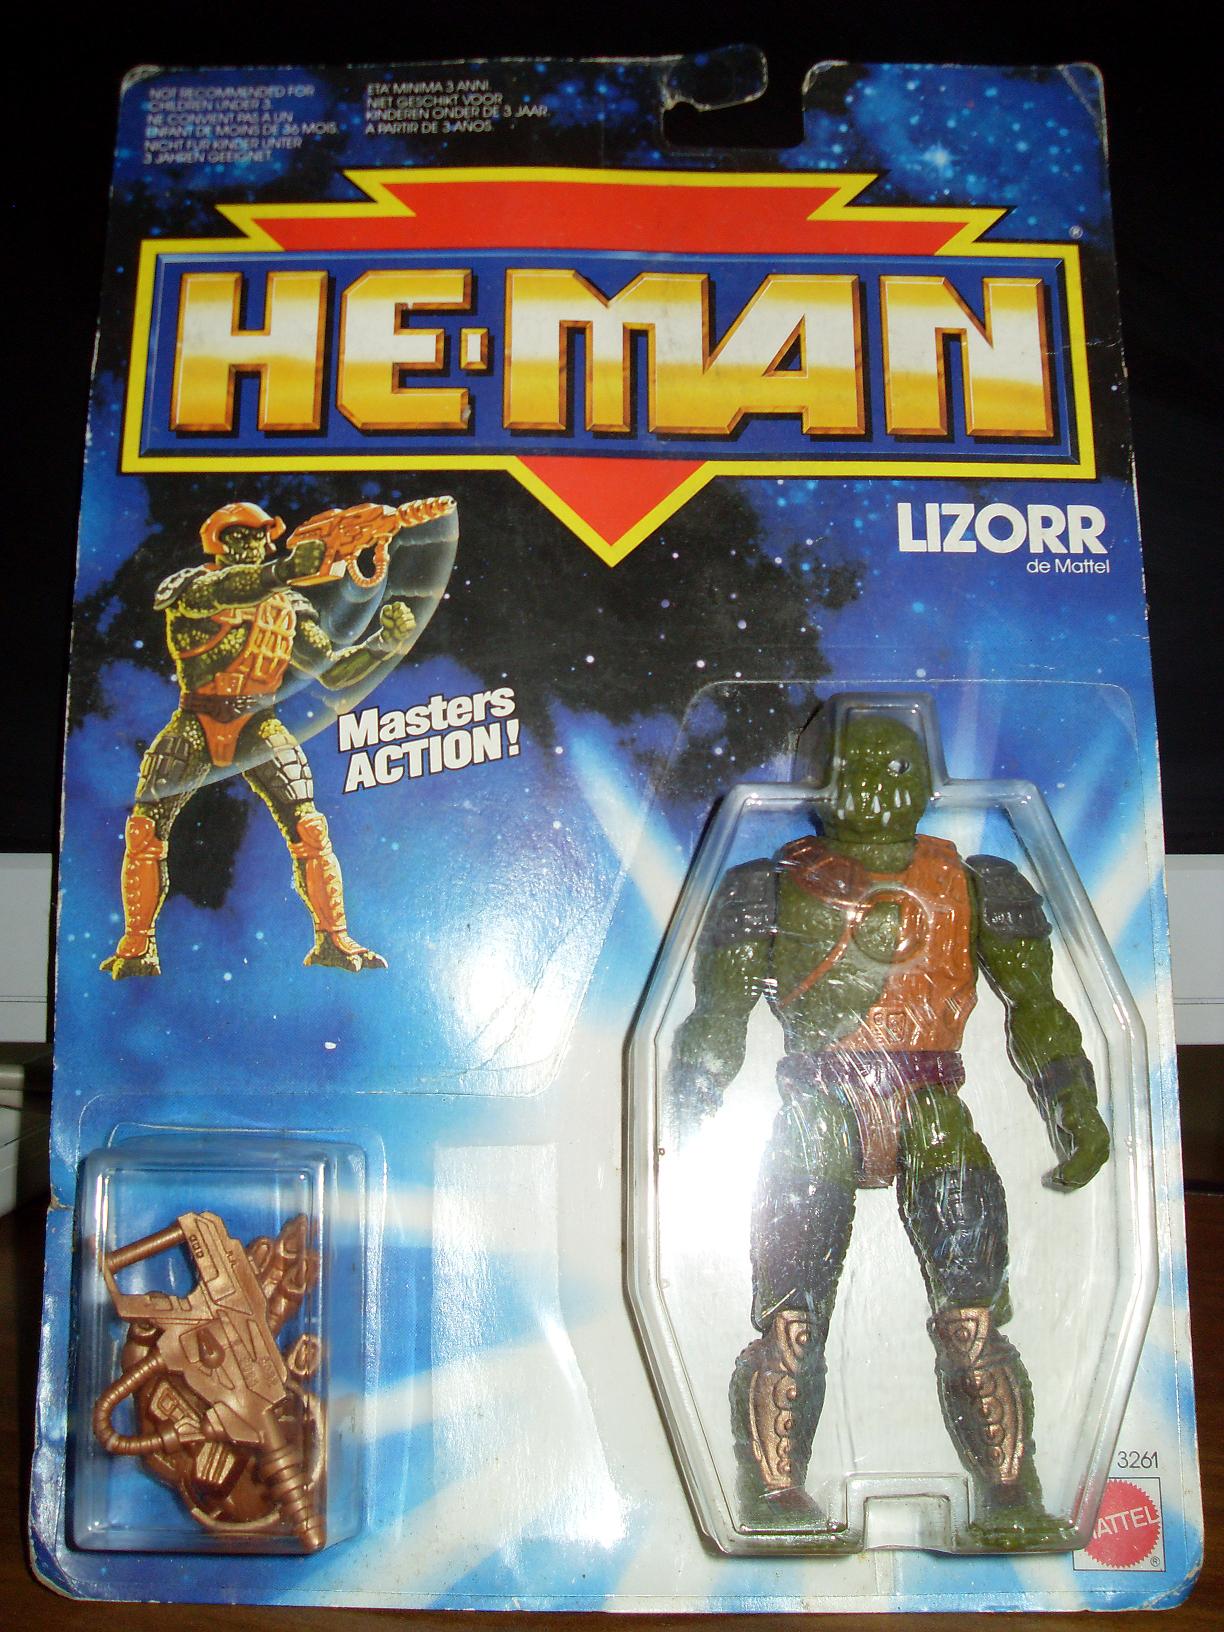 LORD HE-MAN Colecction 8428